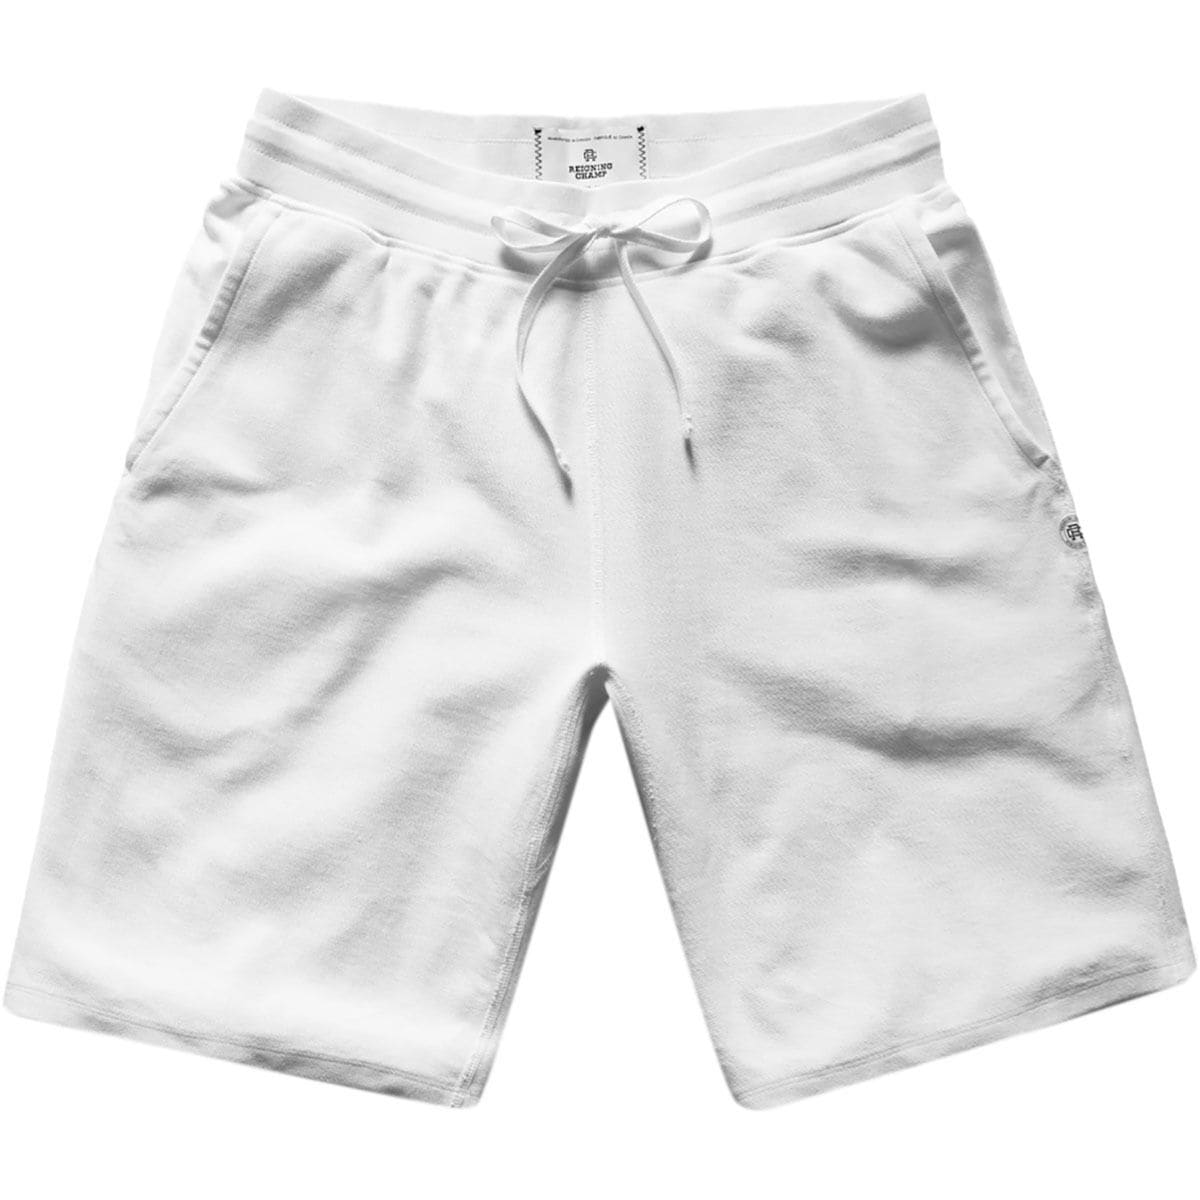 Reigning Champ Reverse Twill Terry Short - Men's - Clothing